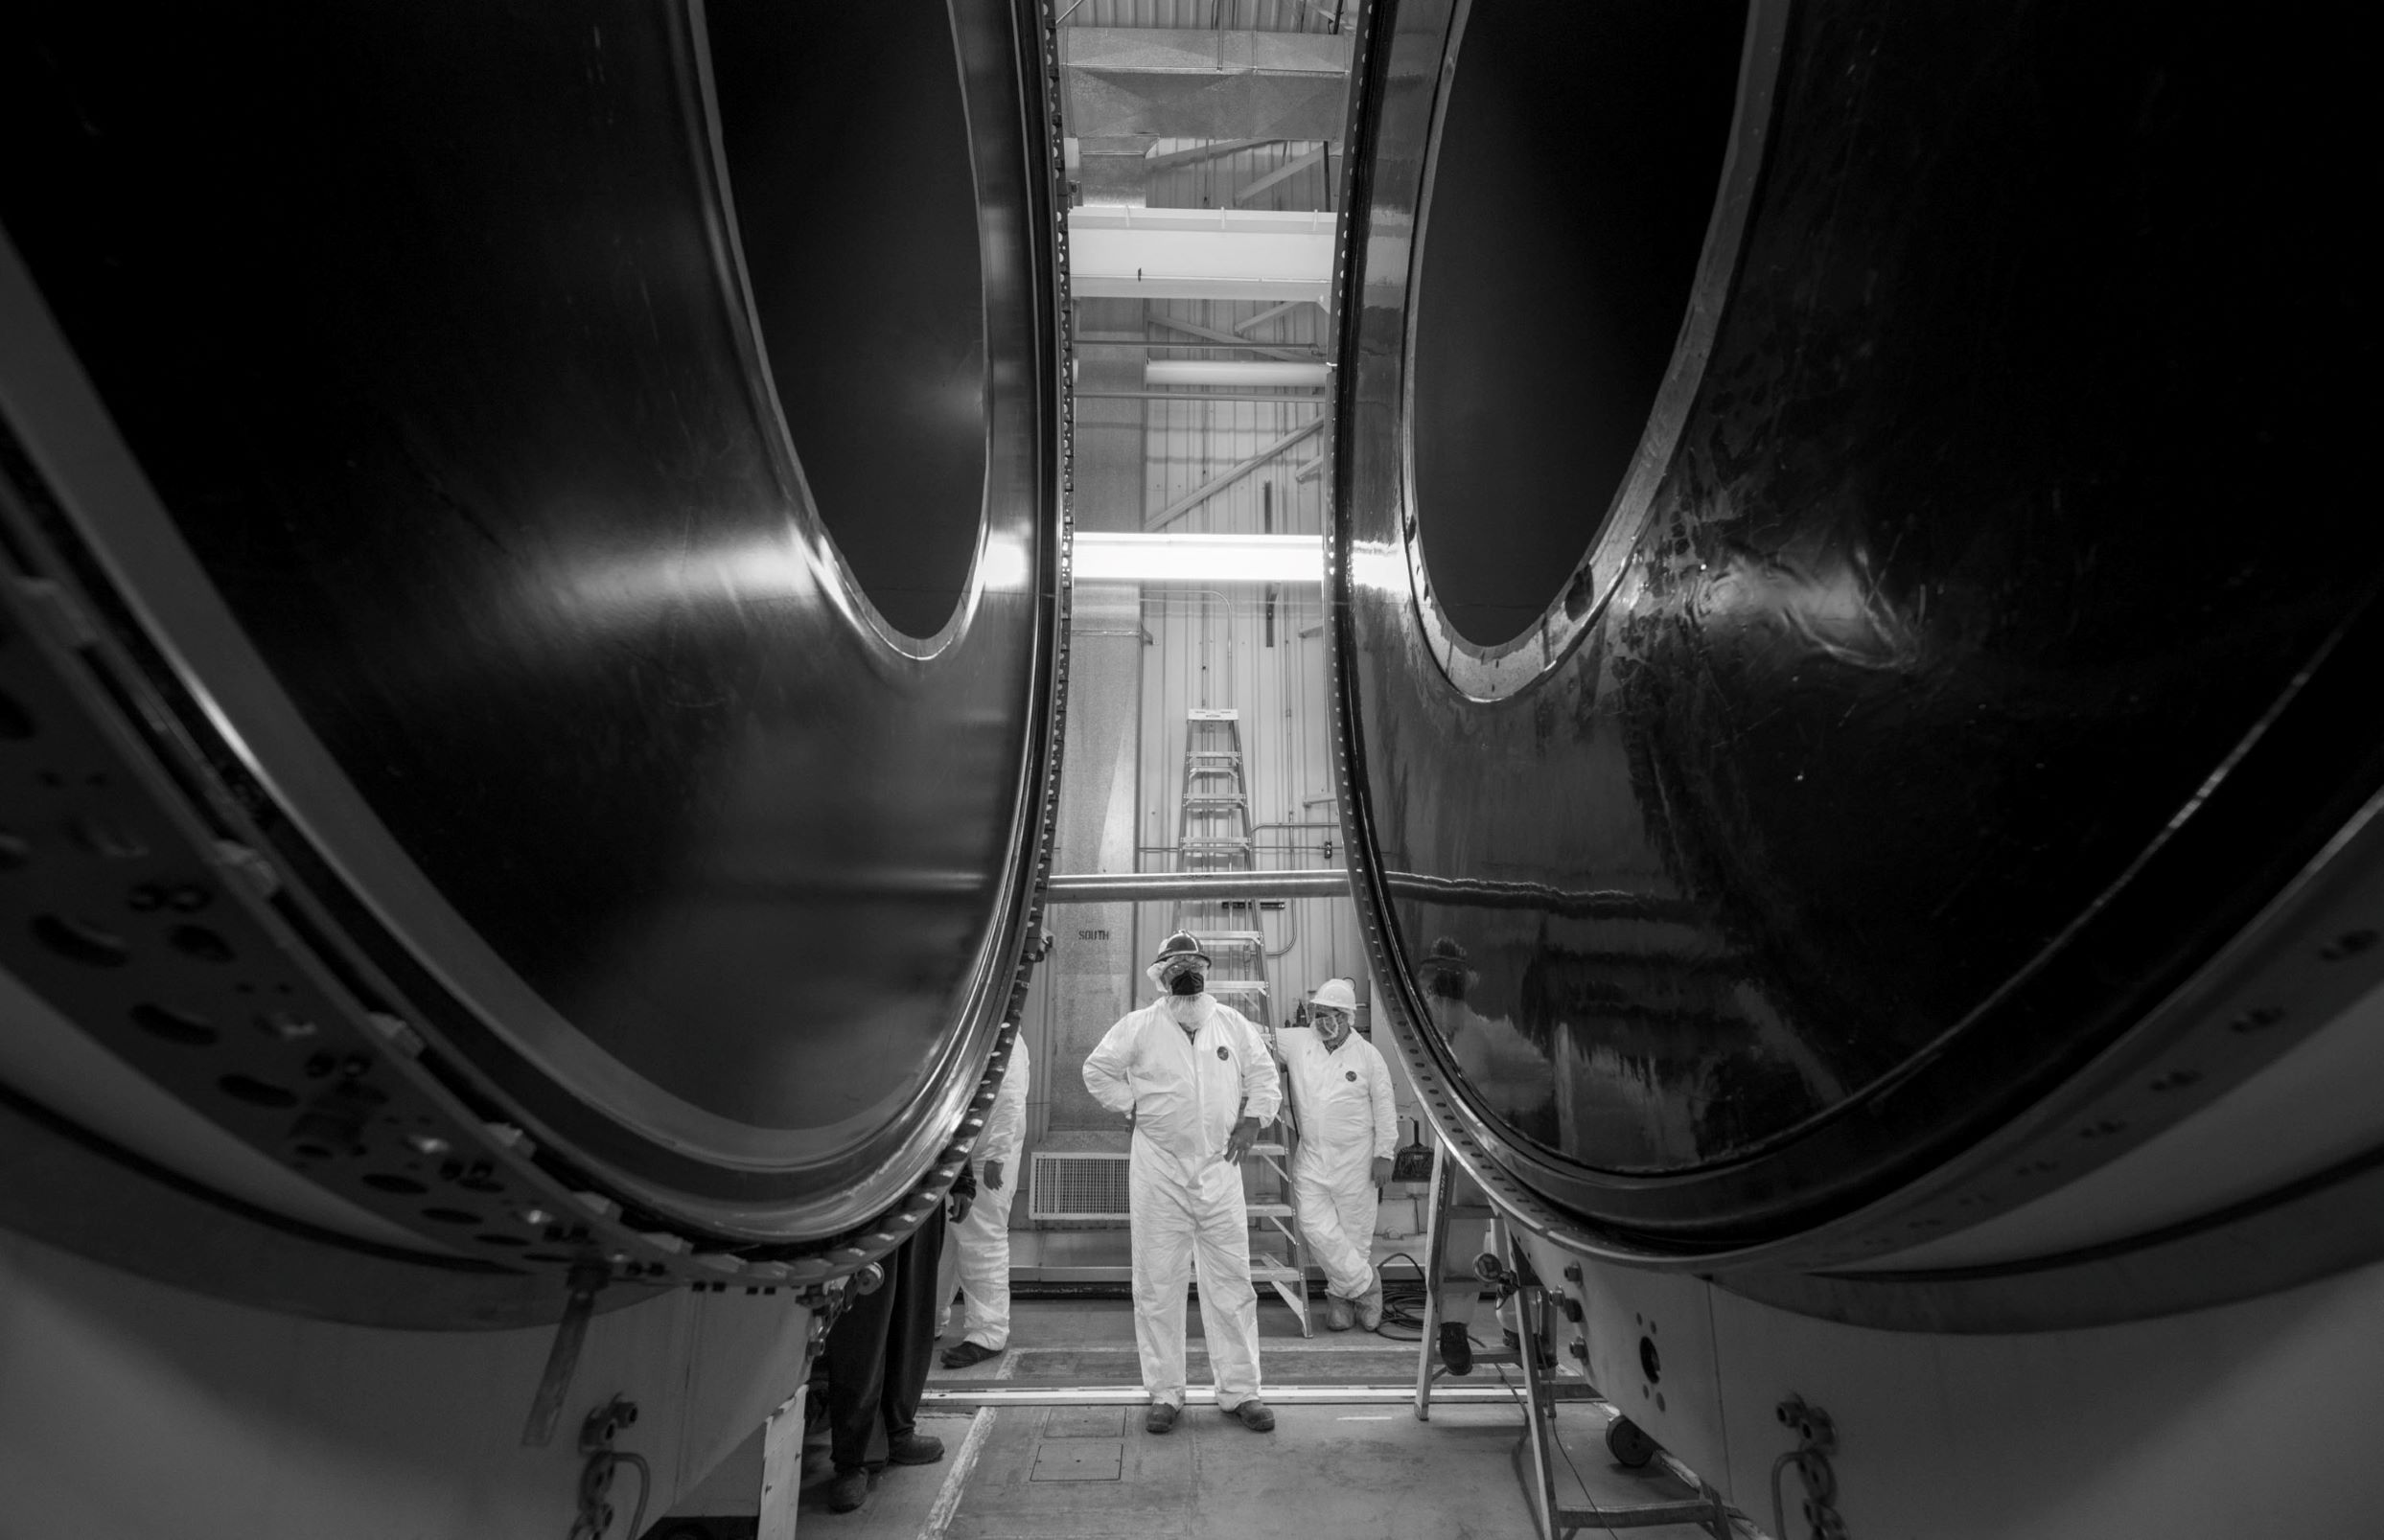 A engineer stands in between the center of a rocket motor inside a facility